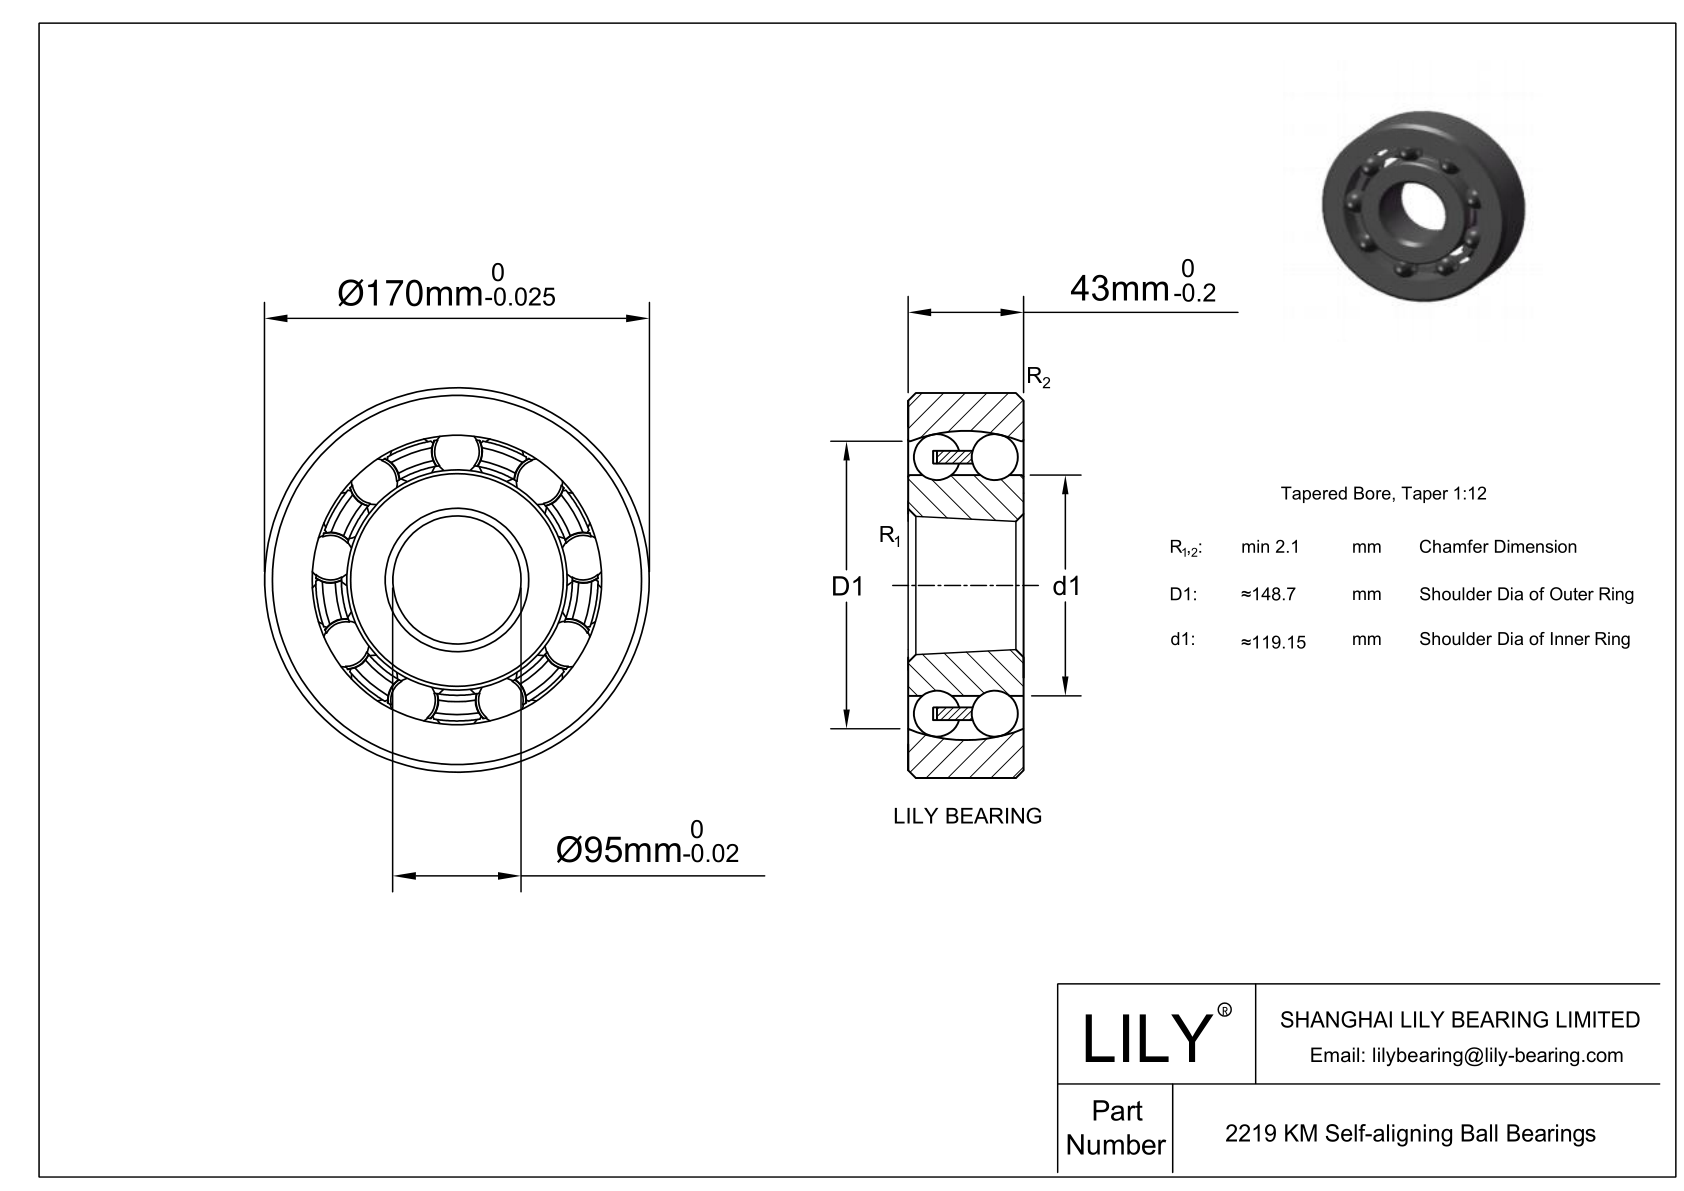 S2219 KM Stainless Steel Self Aligning Ball Bearings cad drawing